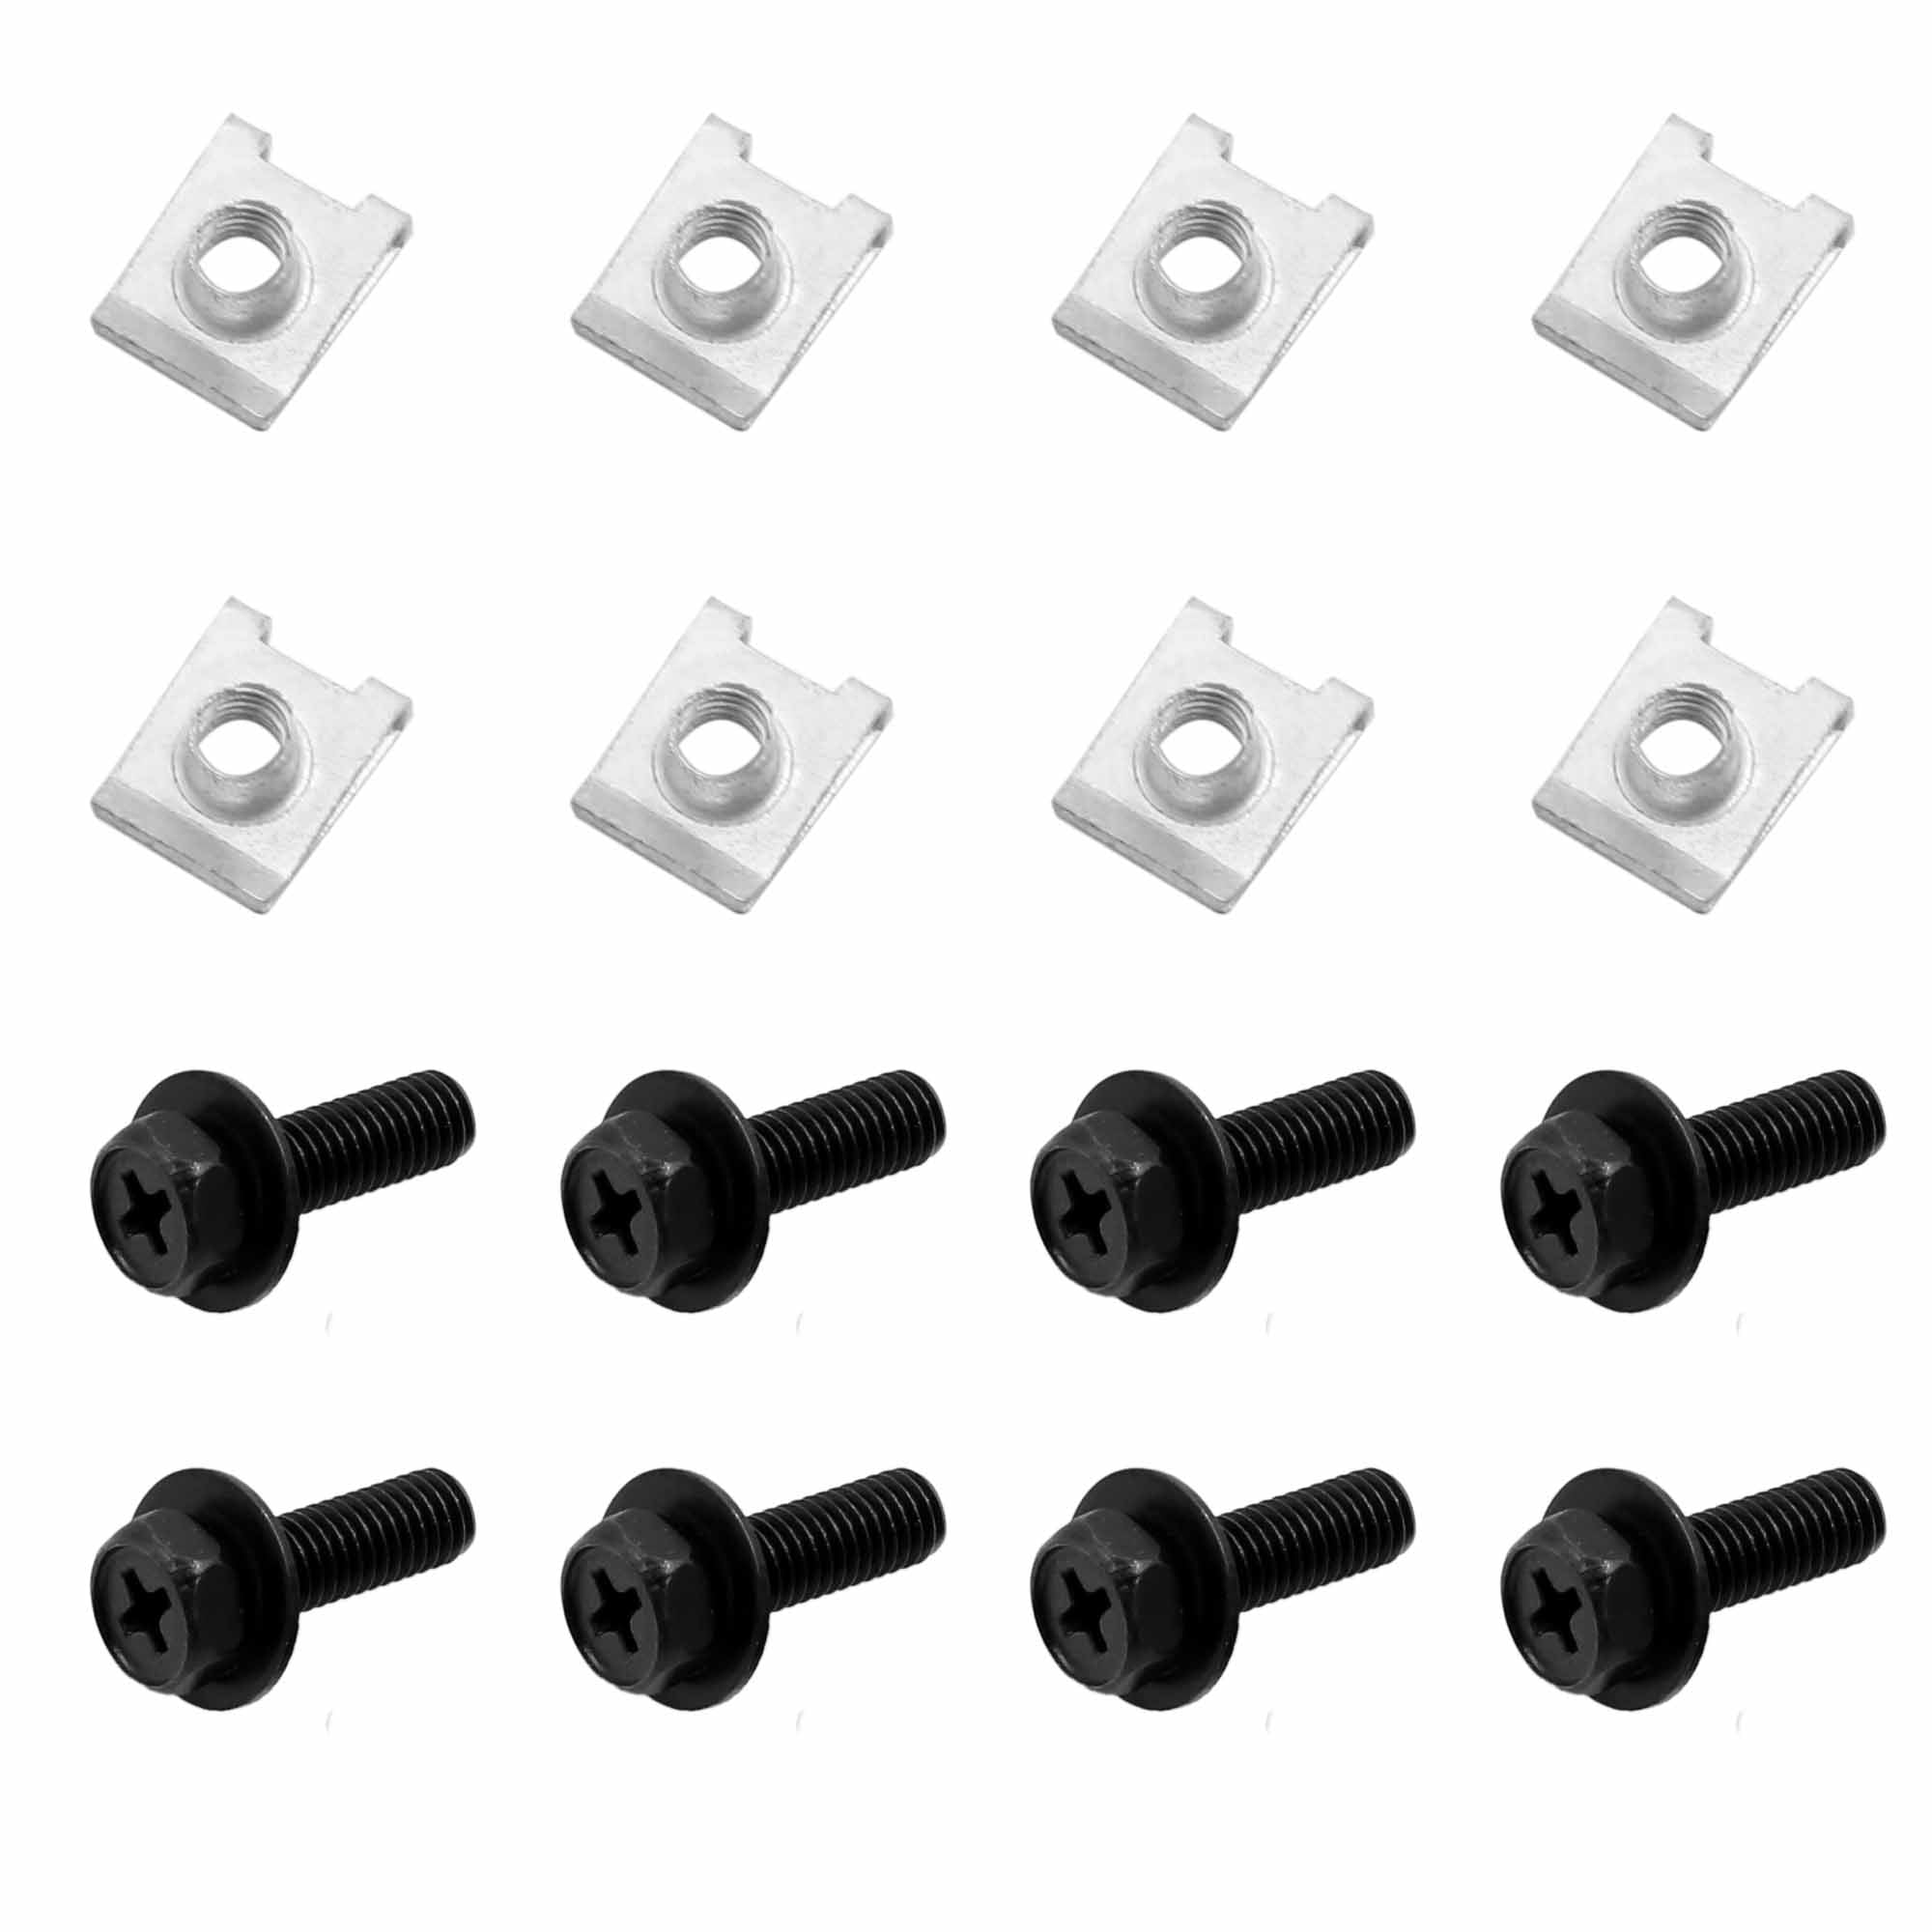 10x Auto Triming Fasteners Panel Retaining Clips For 8mm Metal Nuts Universal